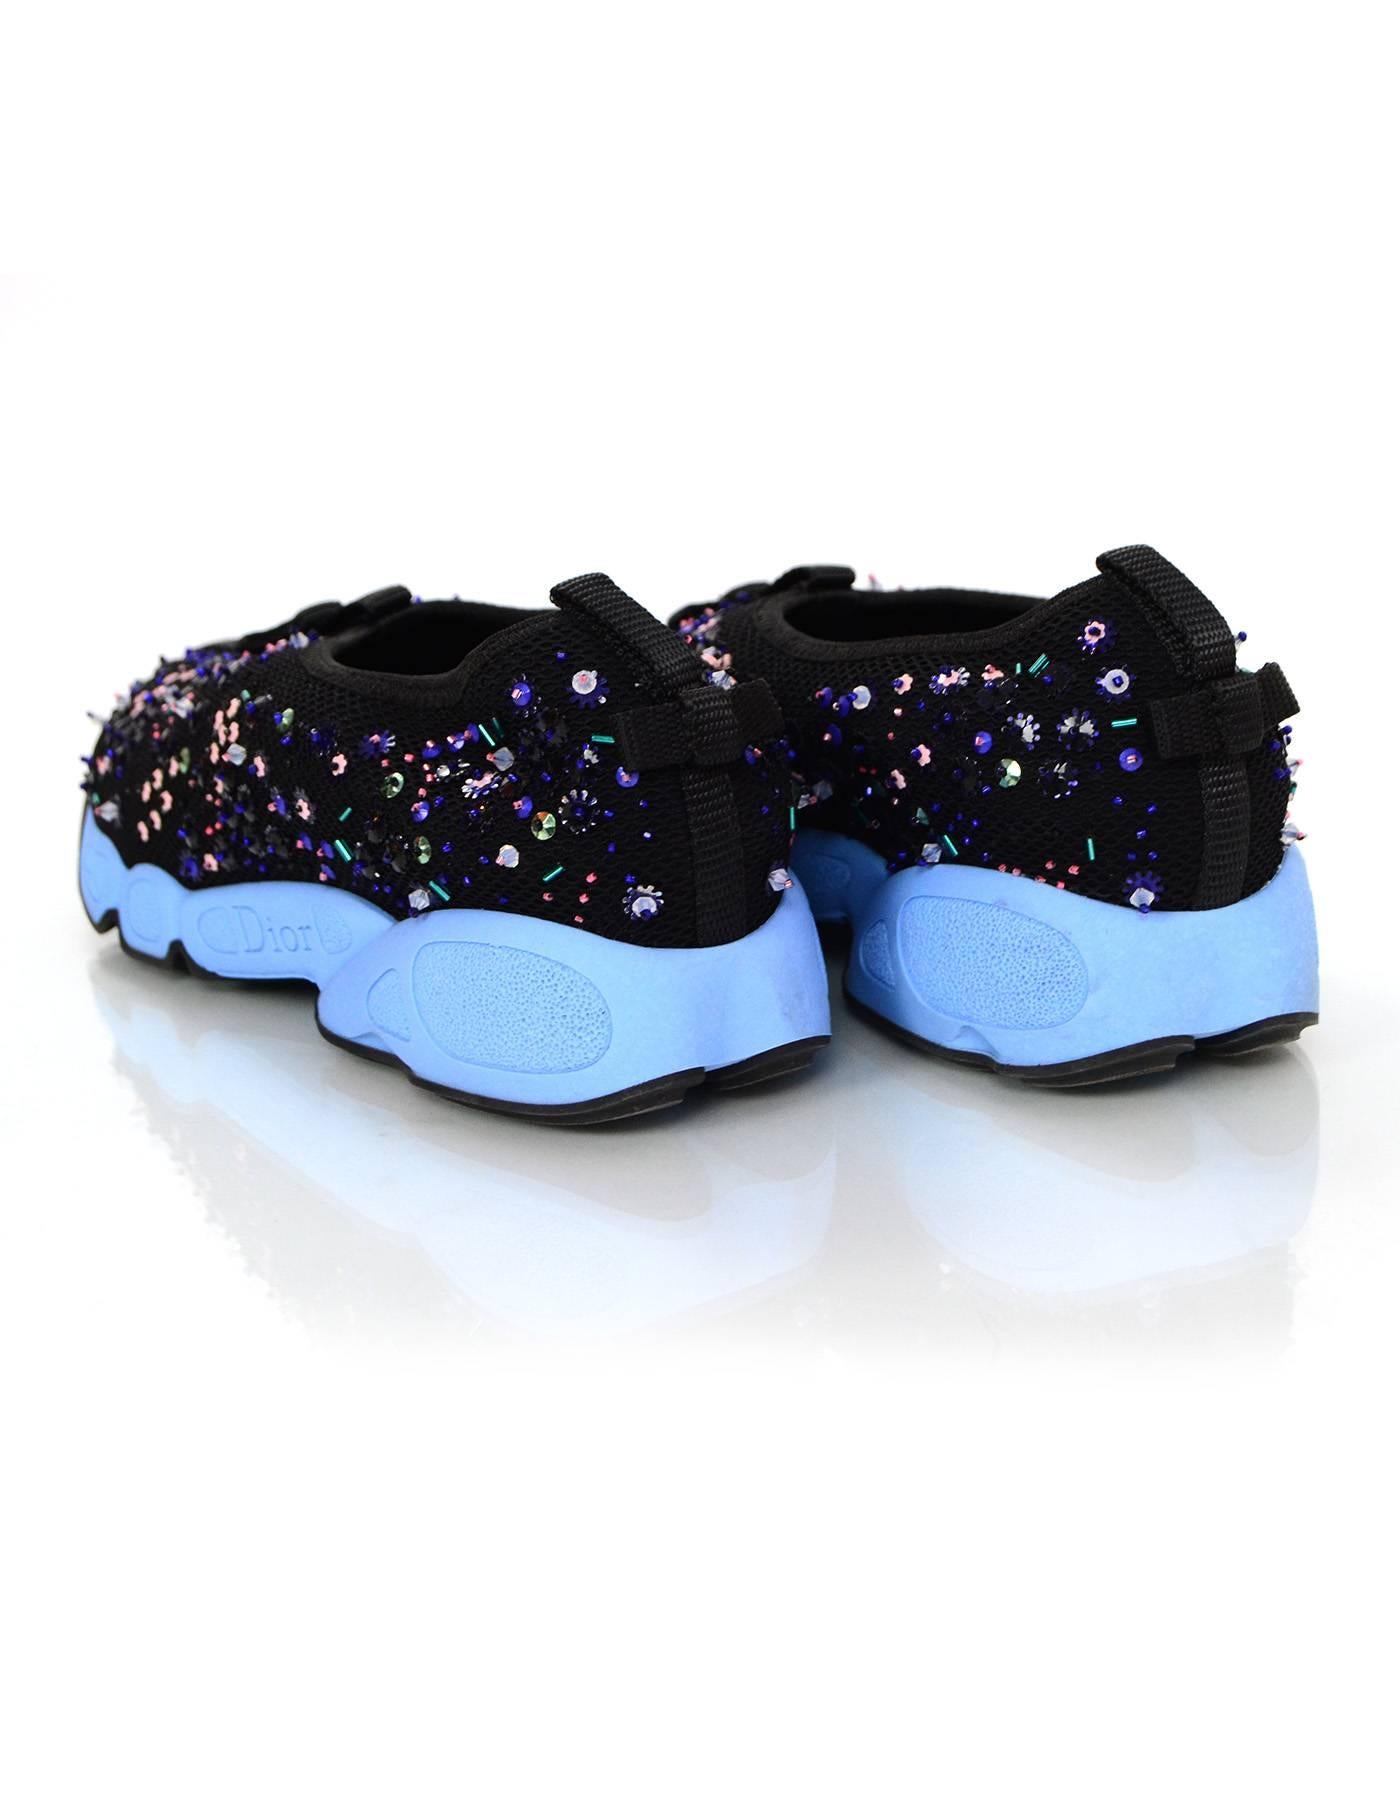 Christian Dior Black and Blue Beaded Fusion Sneakers Sz 38.5 2